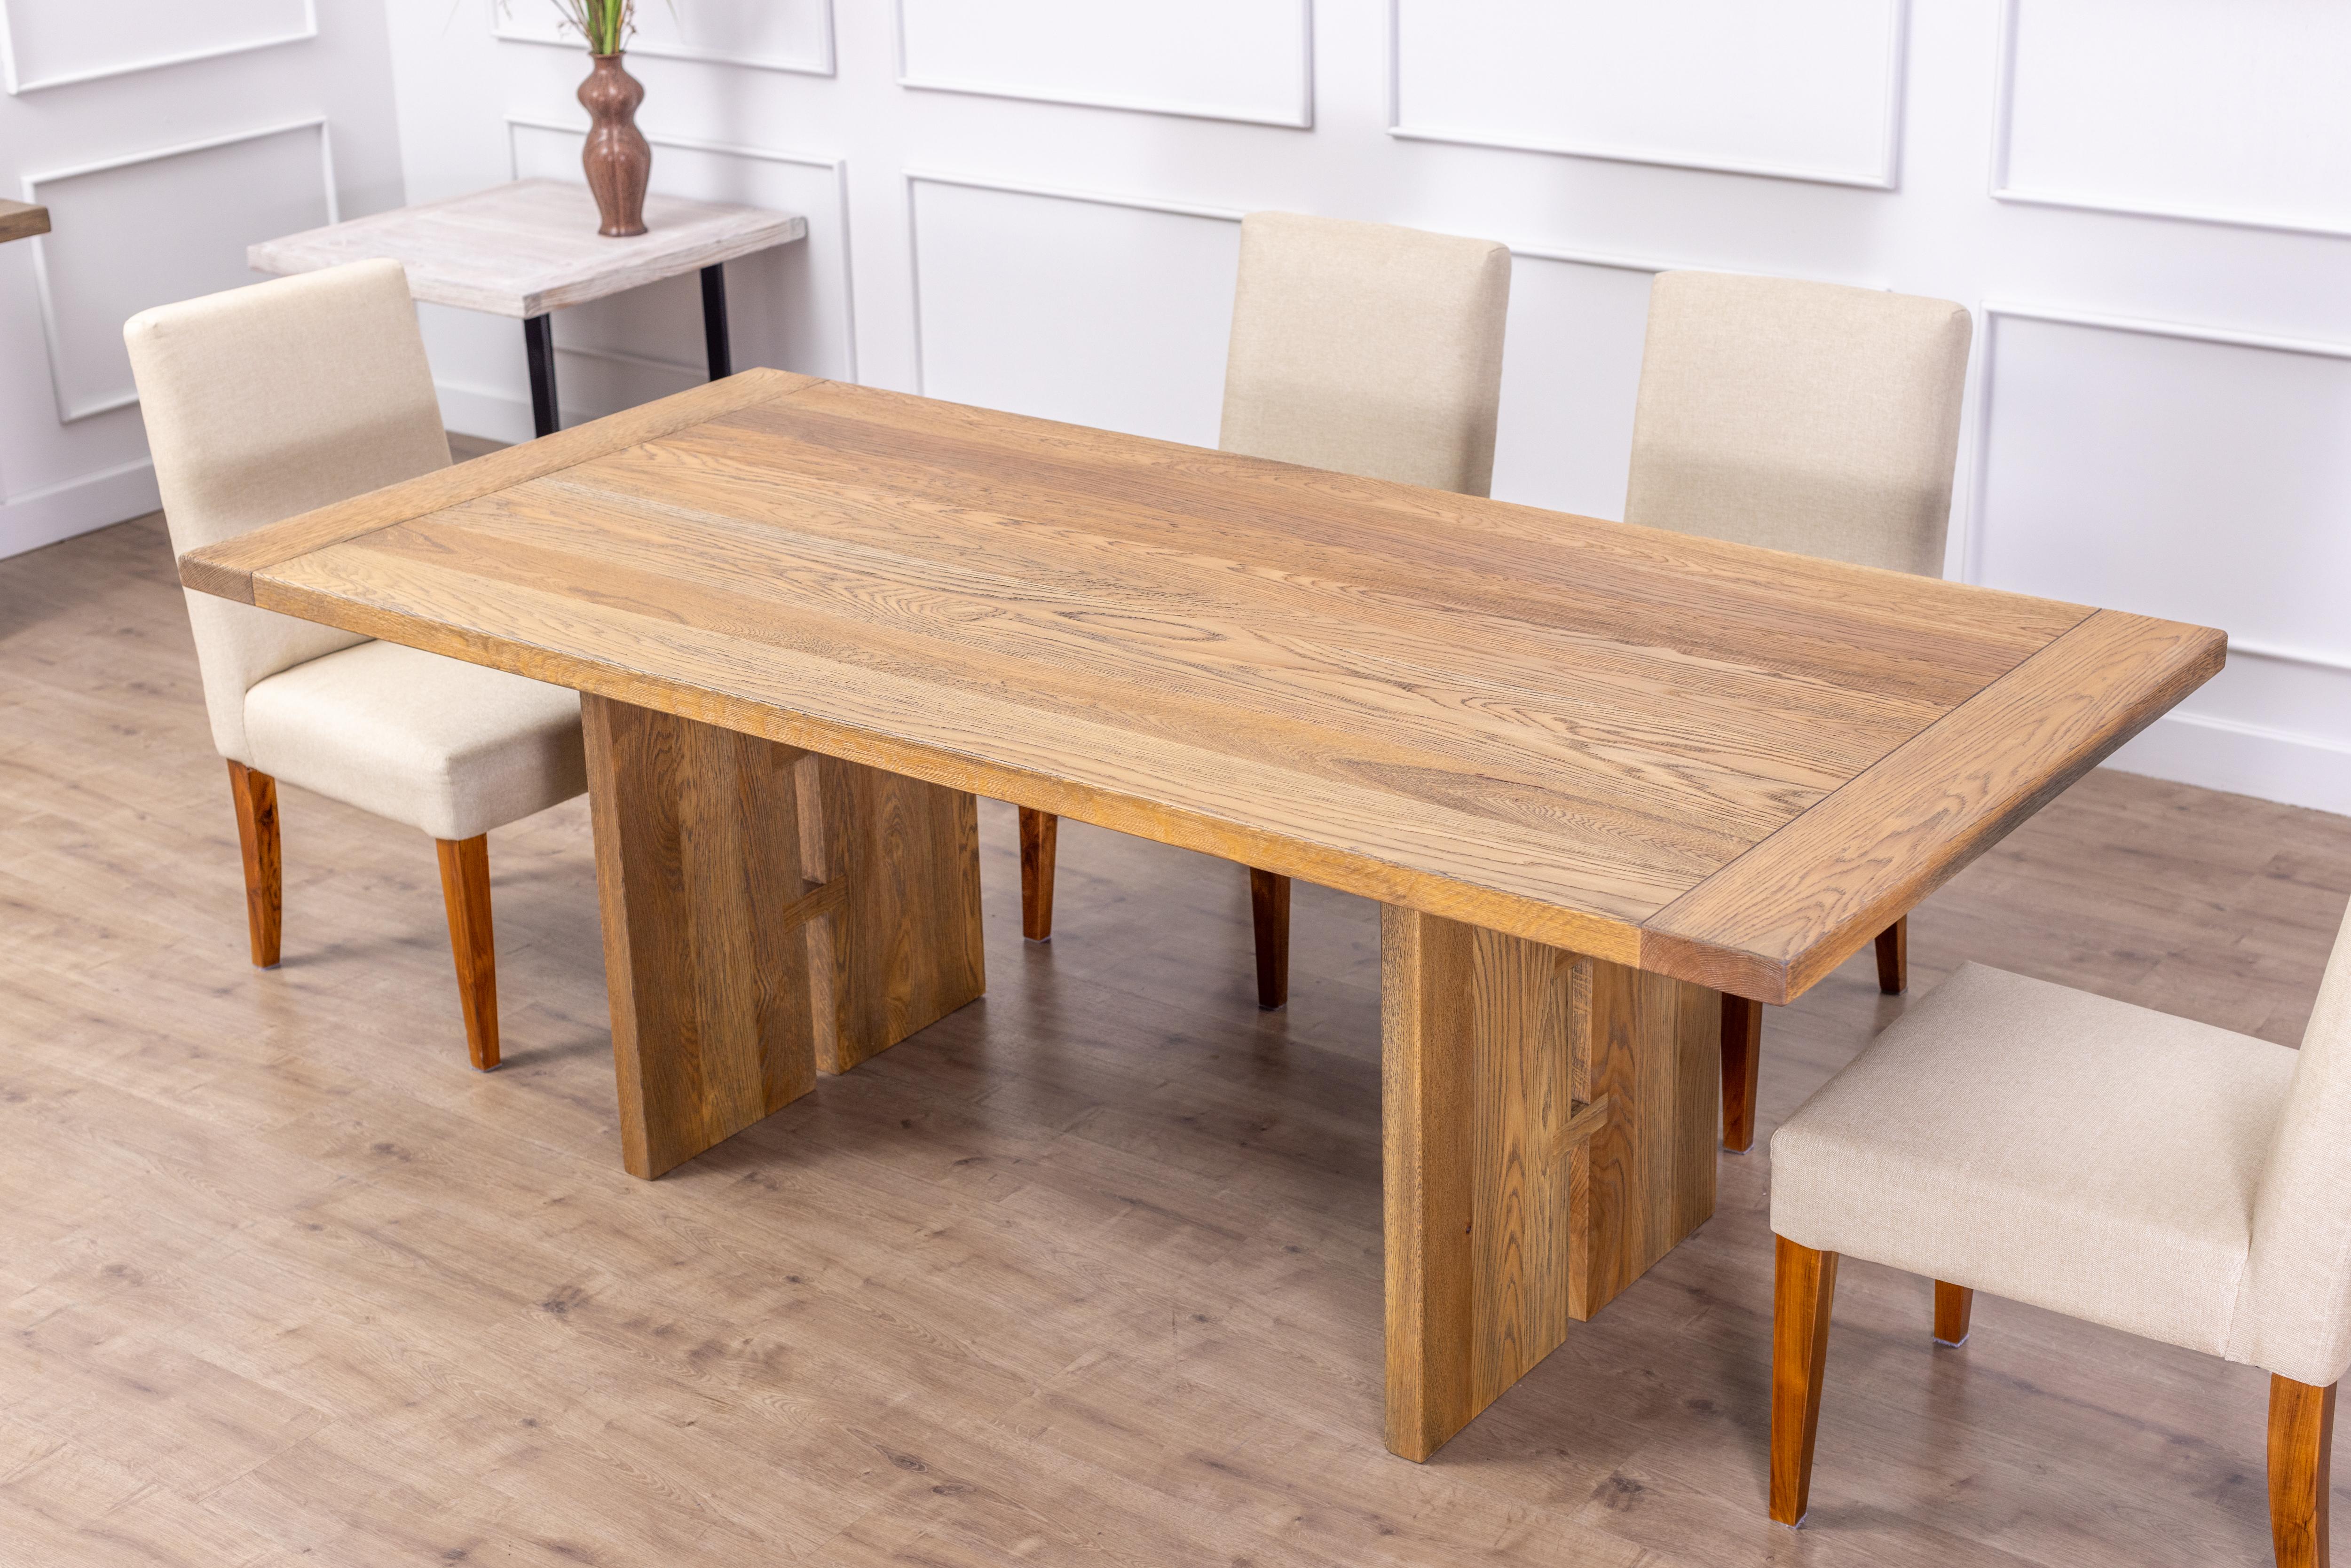 Solid Oak Dining Table with Wood Legs in a Sandblasted Autumn Stain In New Condition For Sale In Boulder, CO